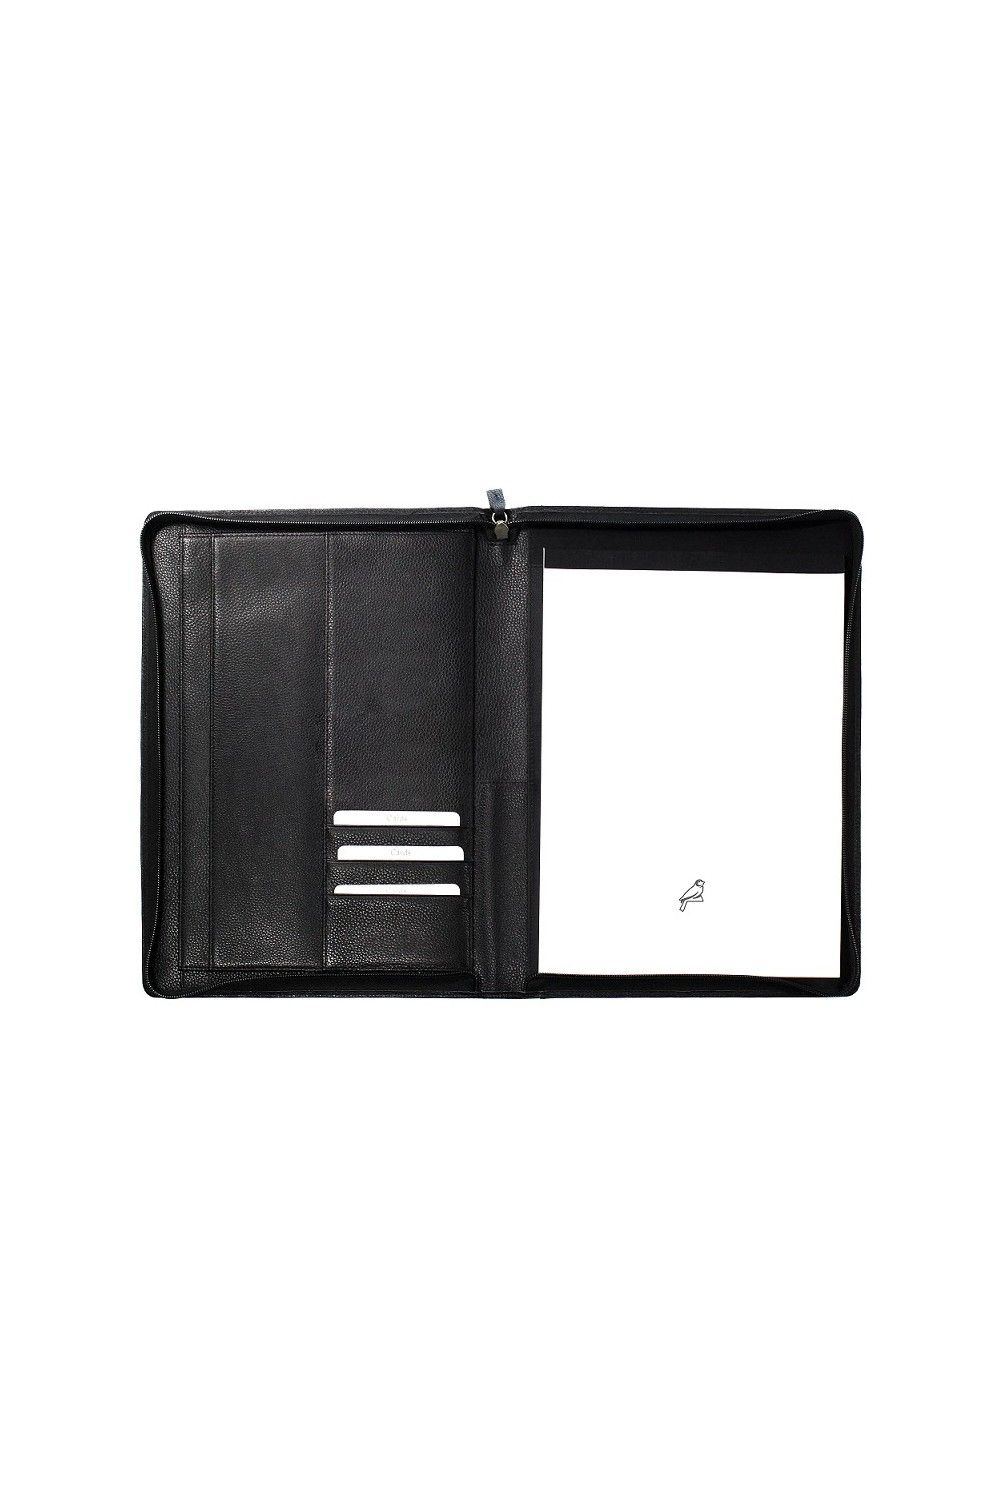 Writing case PA A4 genuine leather black 8104.00